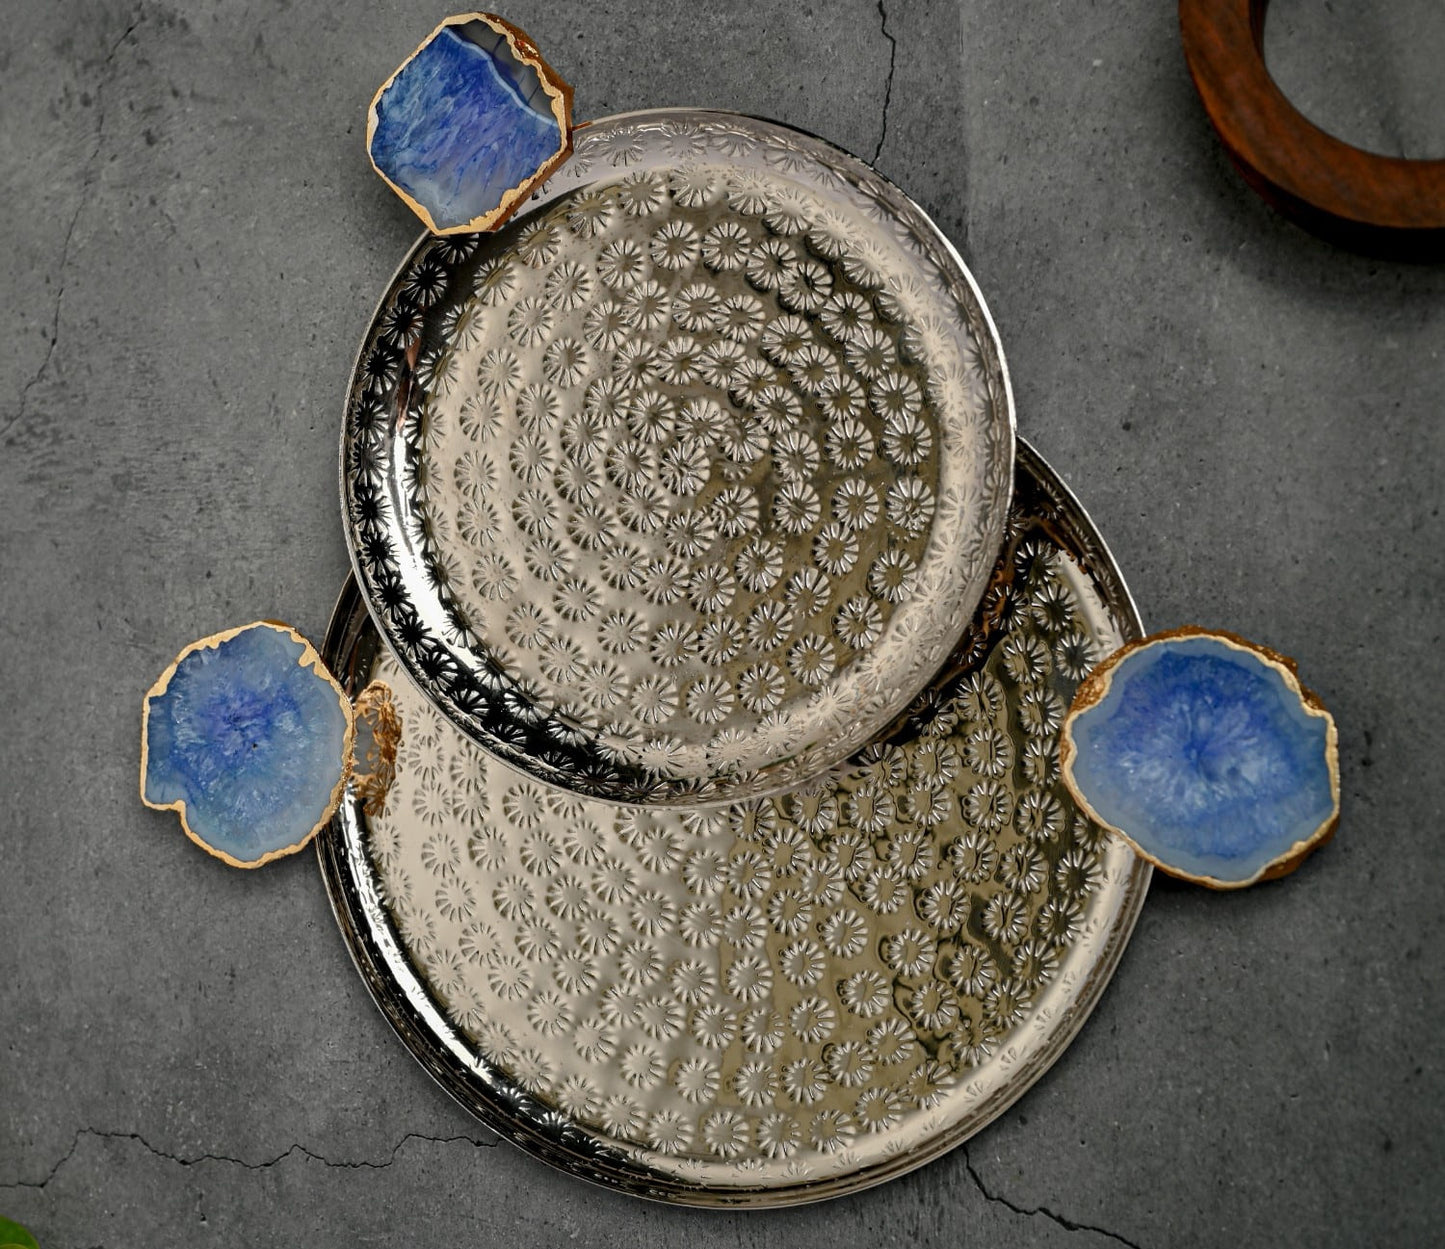 Round Aluminum Tray with Agate Decorative Metal Platter Set of 2 for Serving Cakes Pastries Snacks Breakfast Coffee Party and Dining Table- Blue